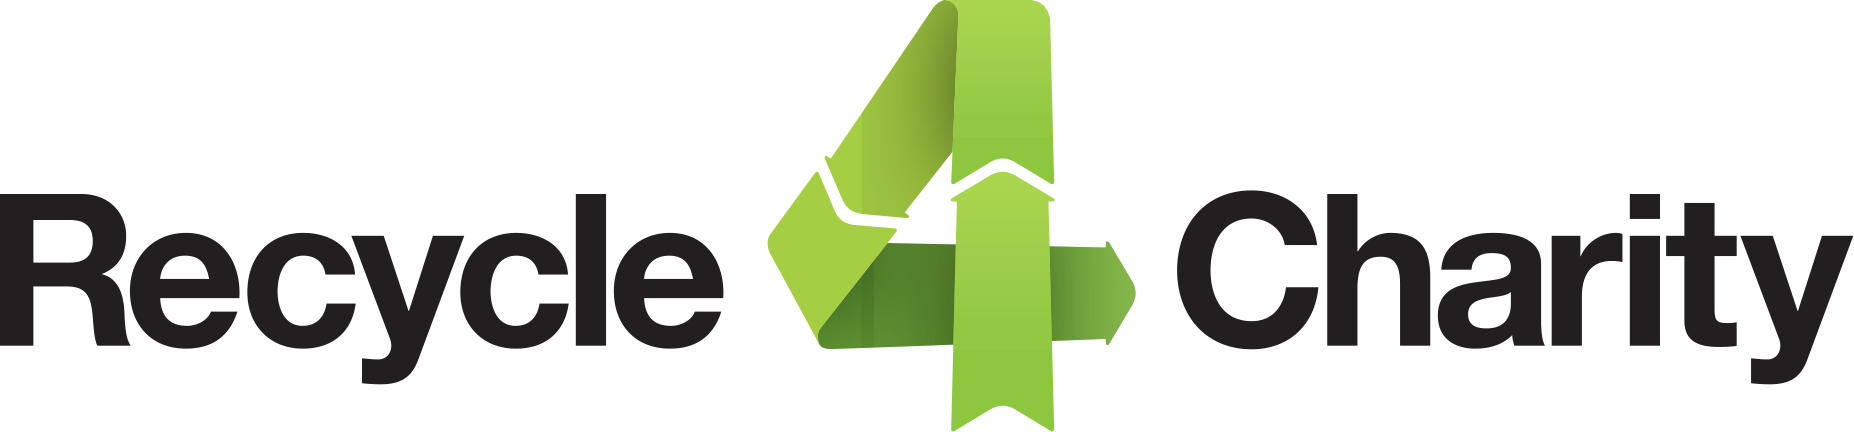 Recycle 4 Charity logo